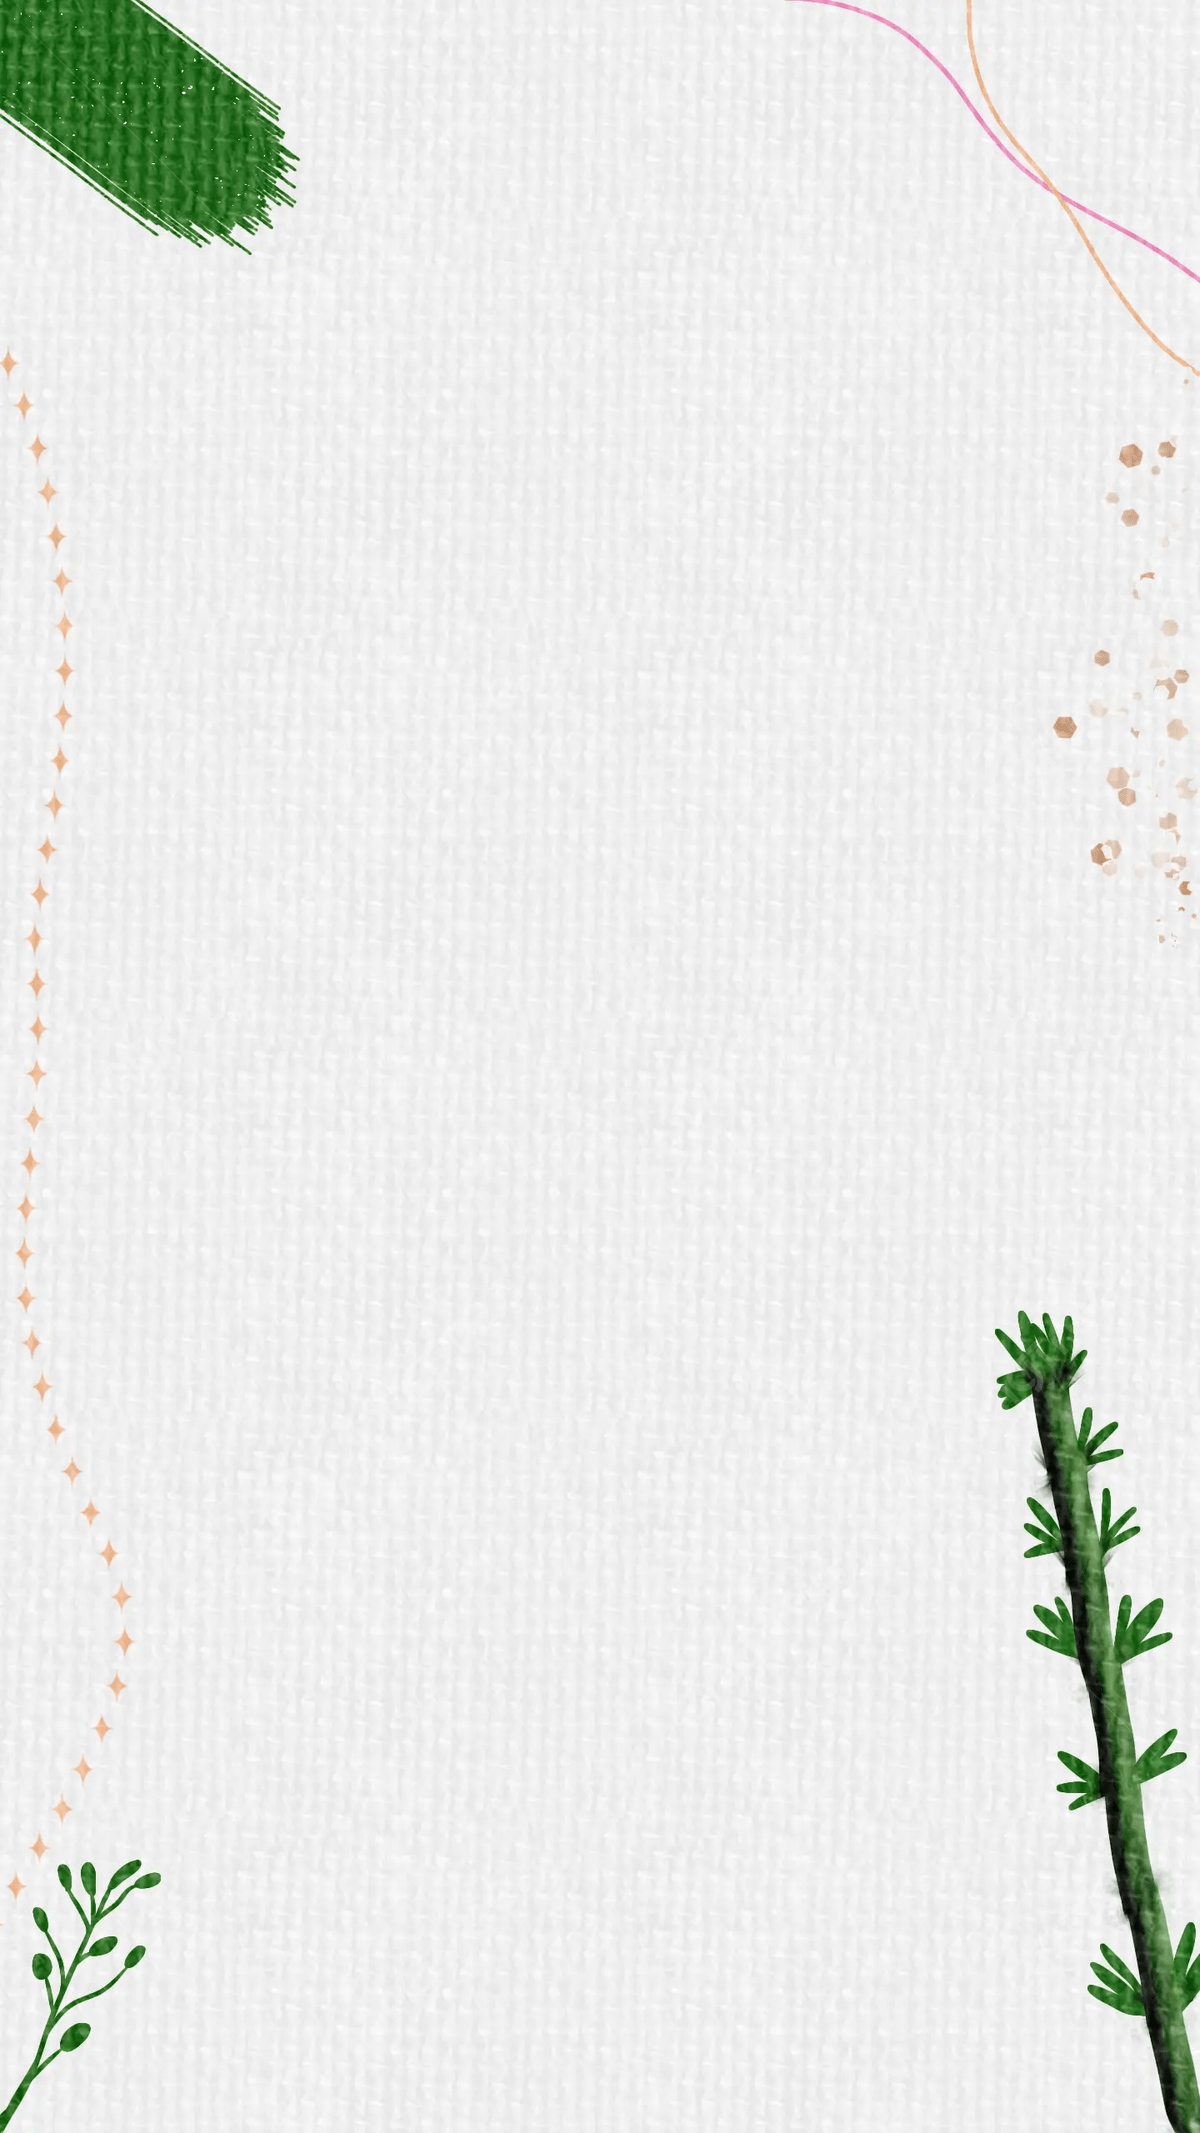 A white background with a plant on the right side - Cute Christmas, border